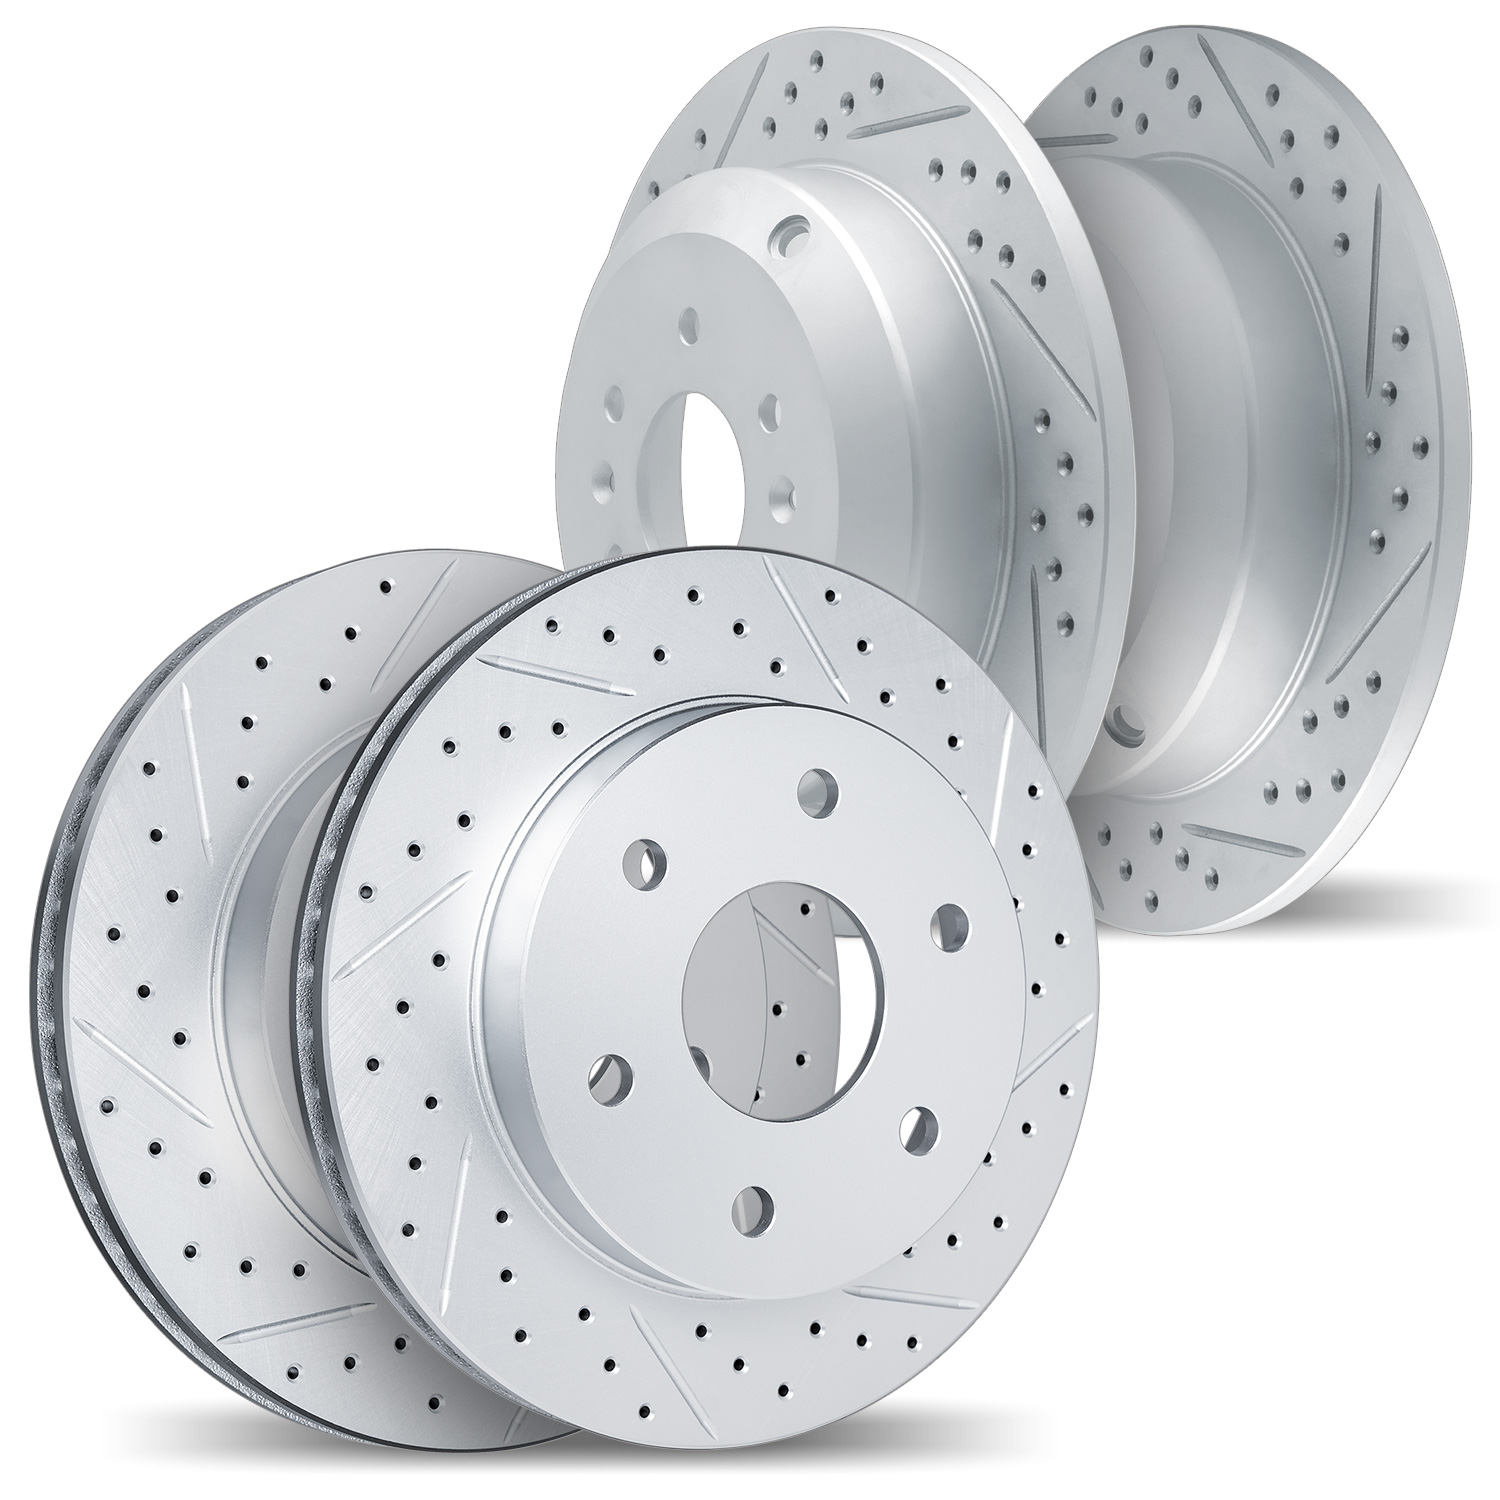 2004-54187 Geoperformance Drilled/Slotted Brake Rotors, Fits Select Ford/Lincoln/Mercury/Mazda, Position: Front and Rear